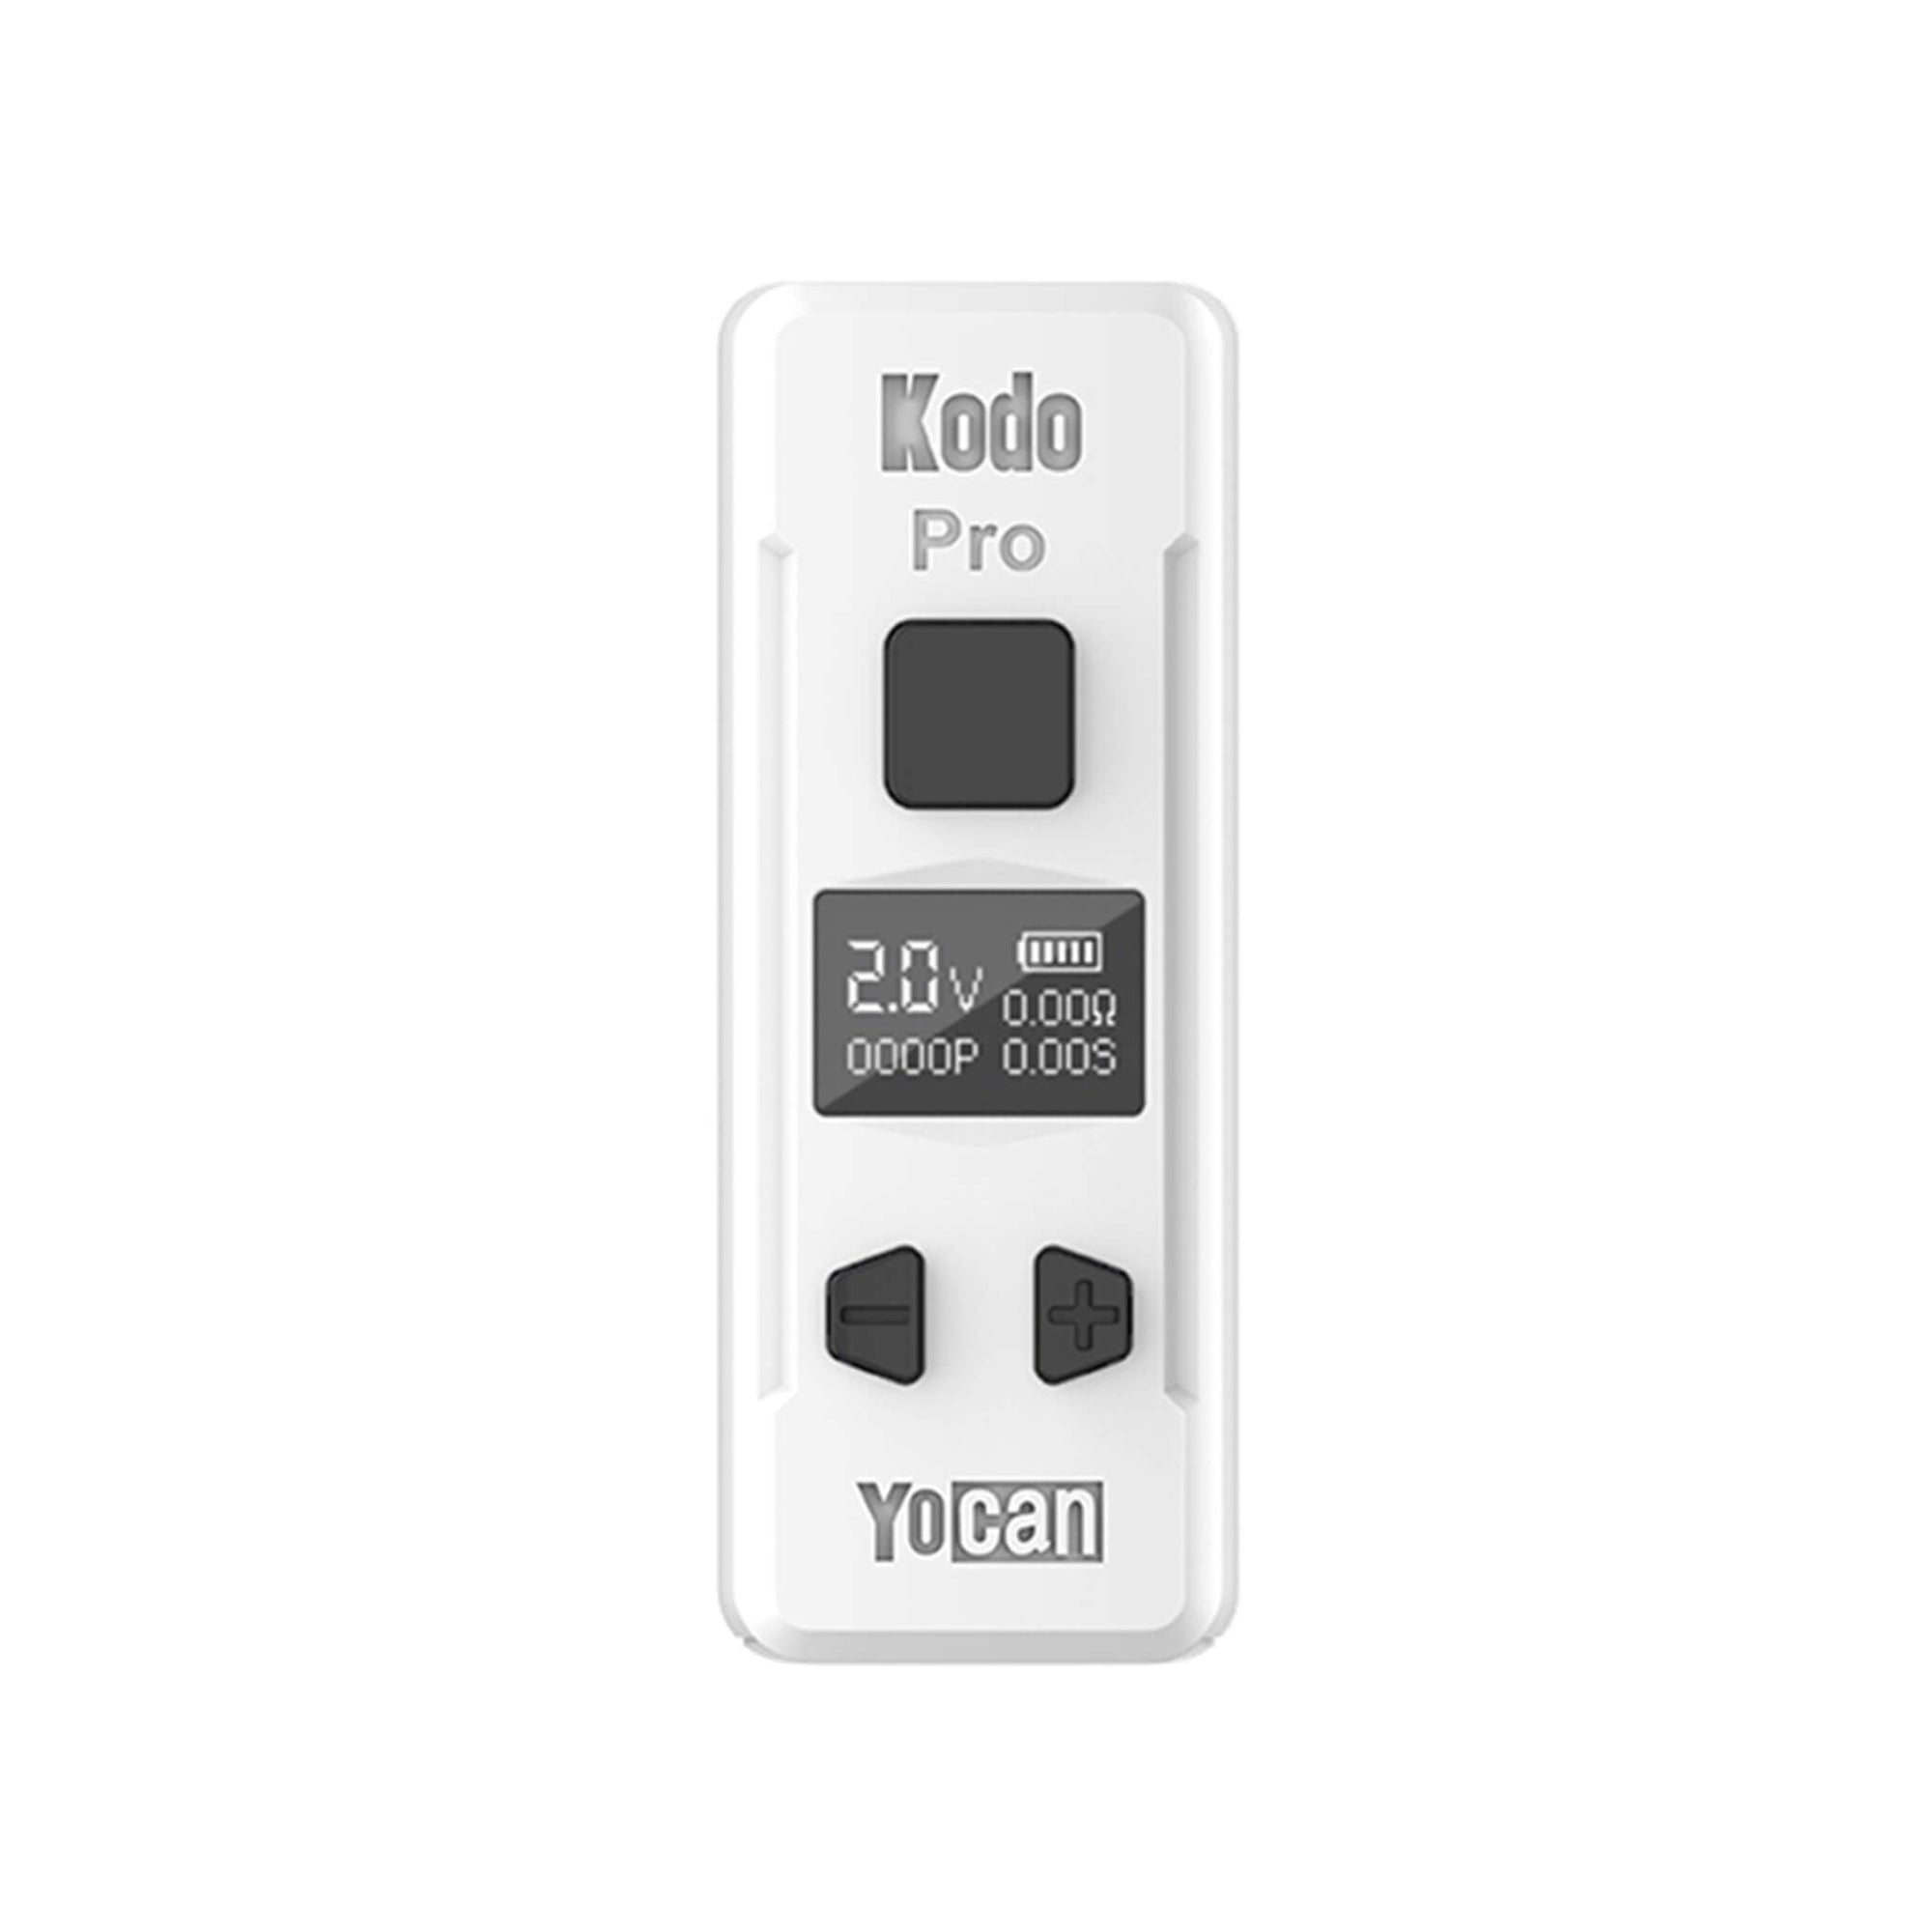 Yocan Kodo Pro 510 Thread Battery | White Color View | the dabbing specialists